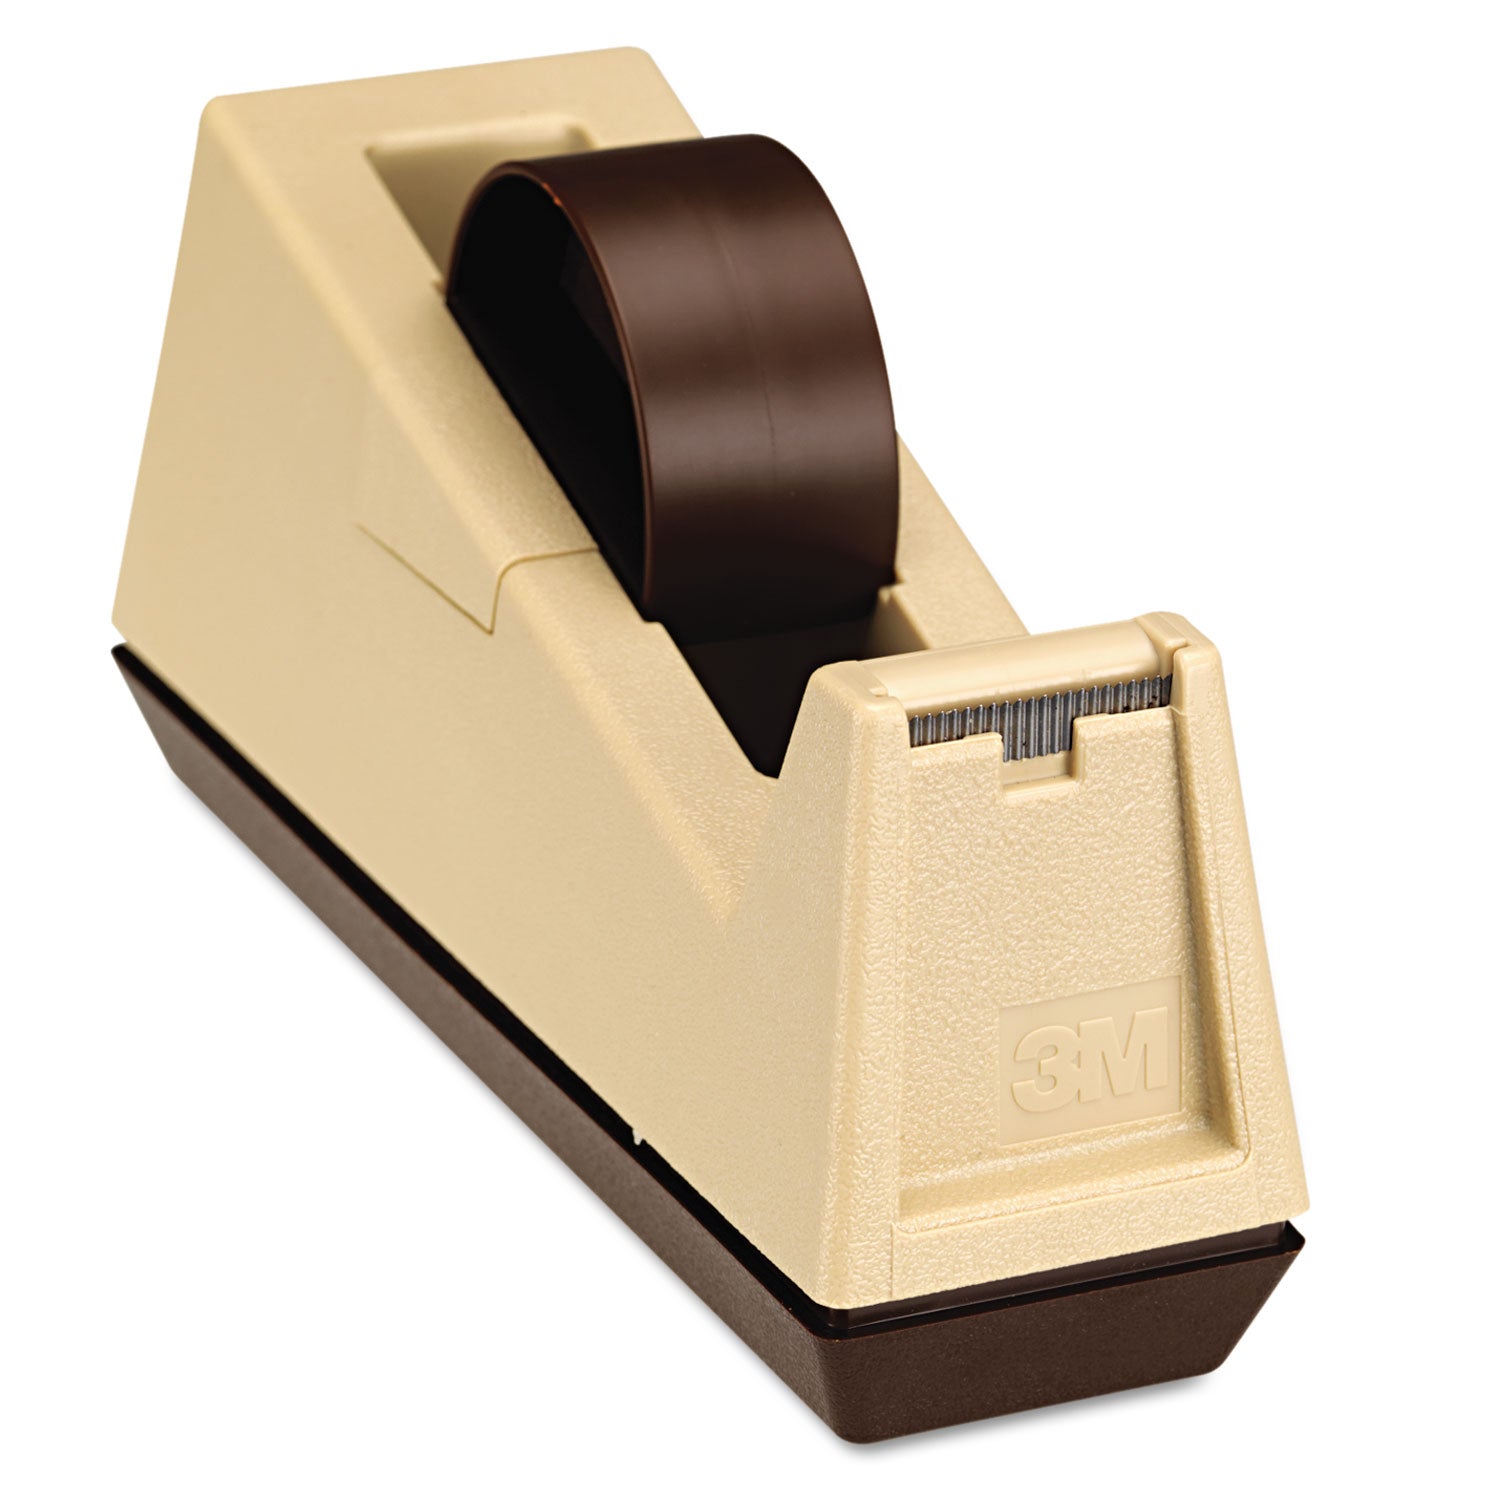 Heavy-Duty Weighted Desktop Tape Dispenser, 3" Core, Plastic, Putty/Brown - 